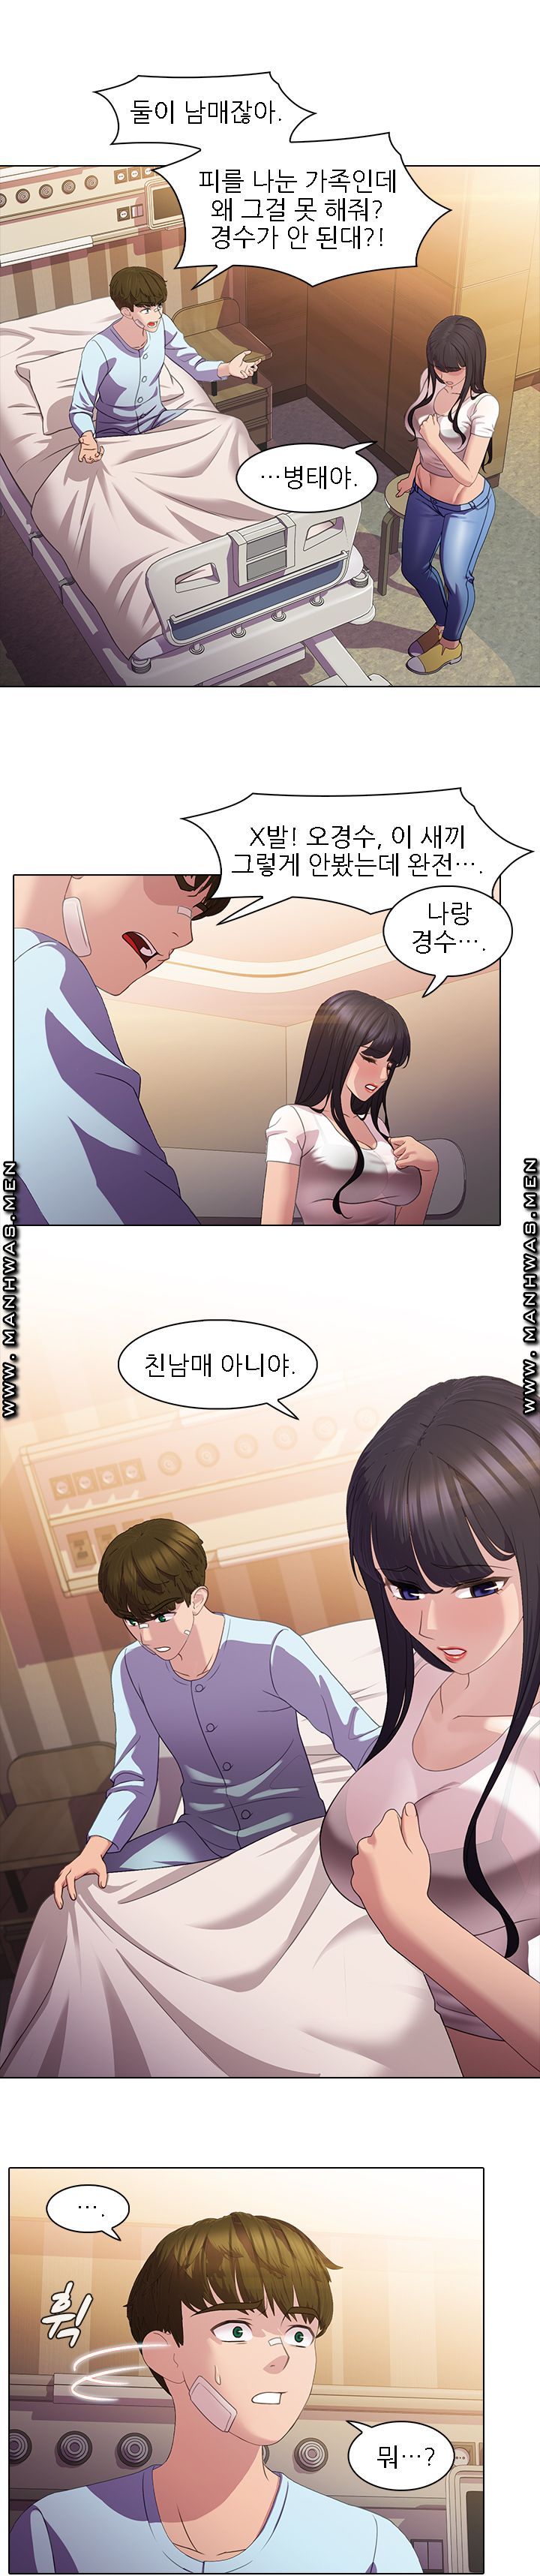 Sister's Friend Raw - Chapter 9 Page 3